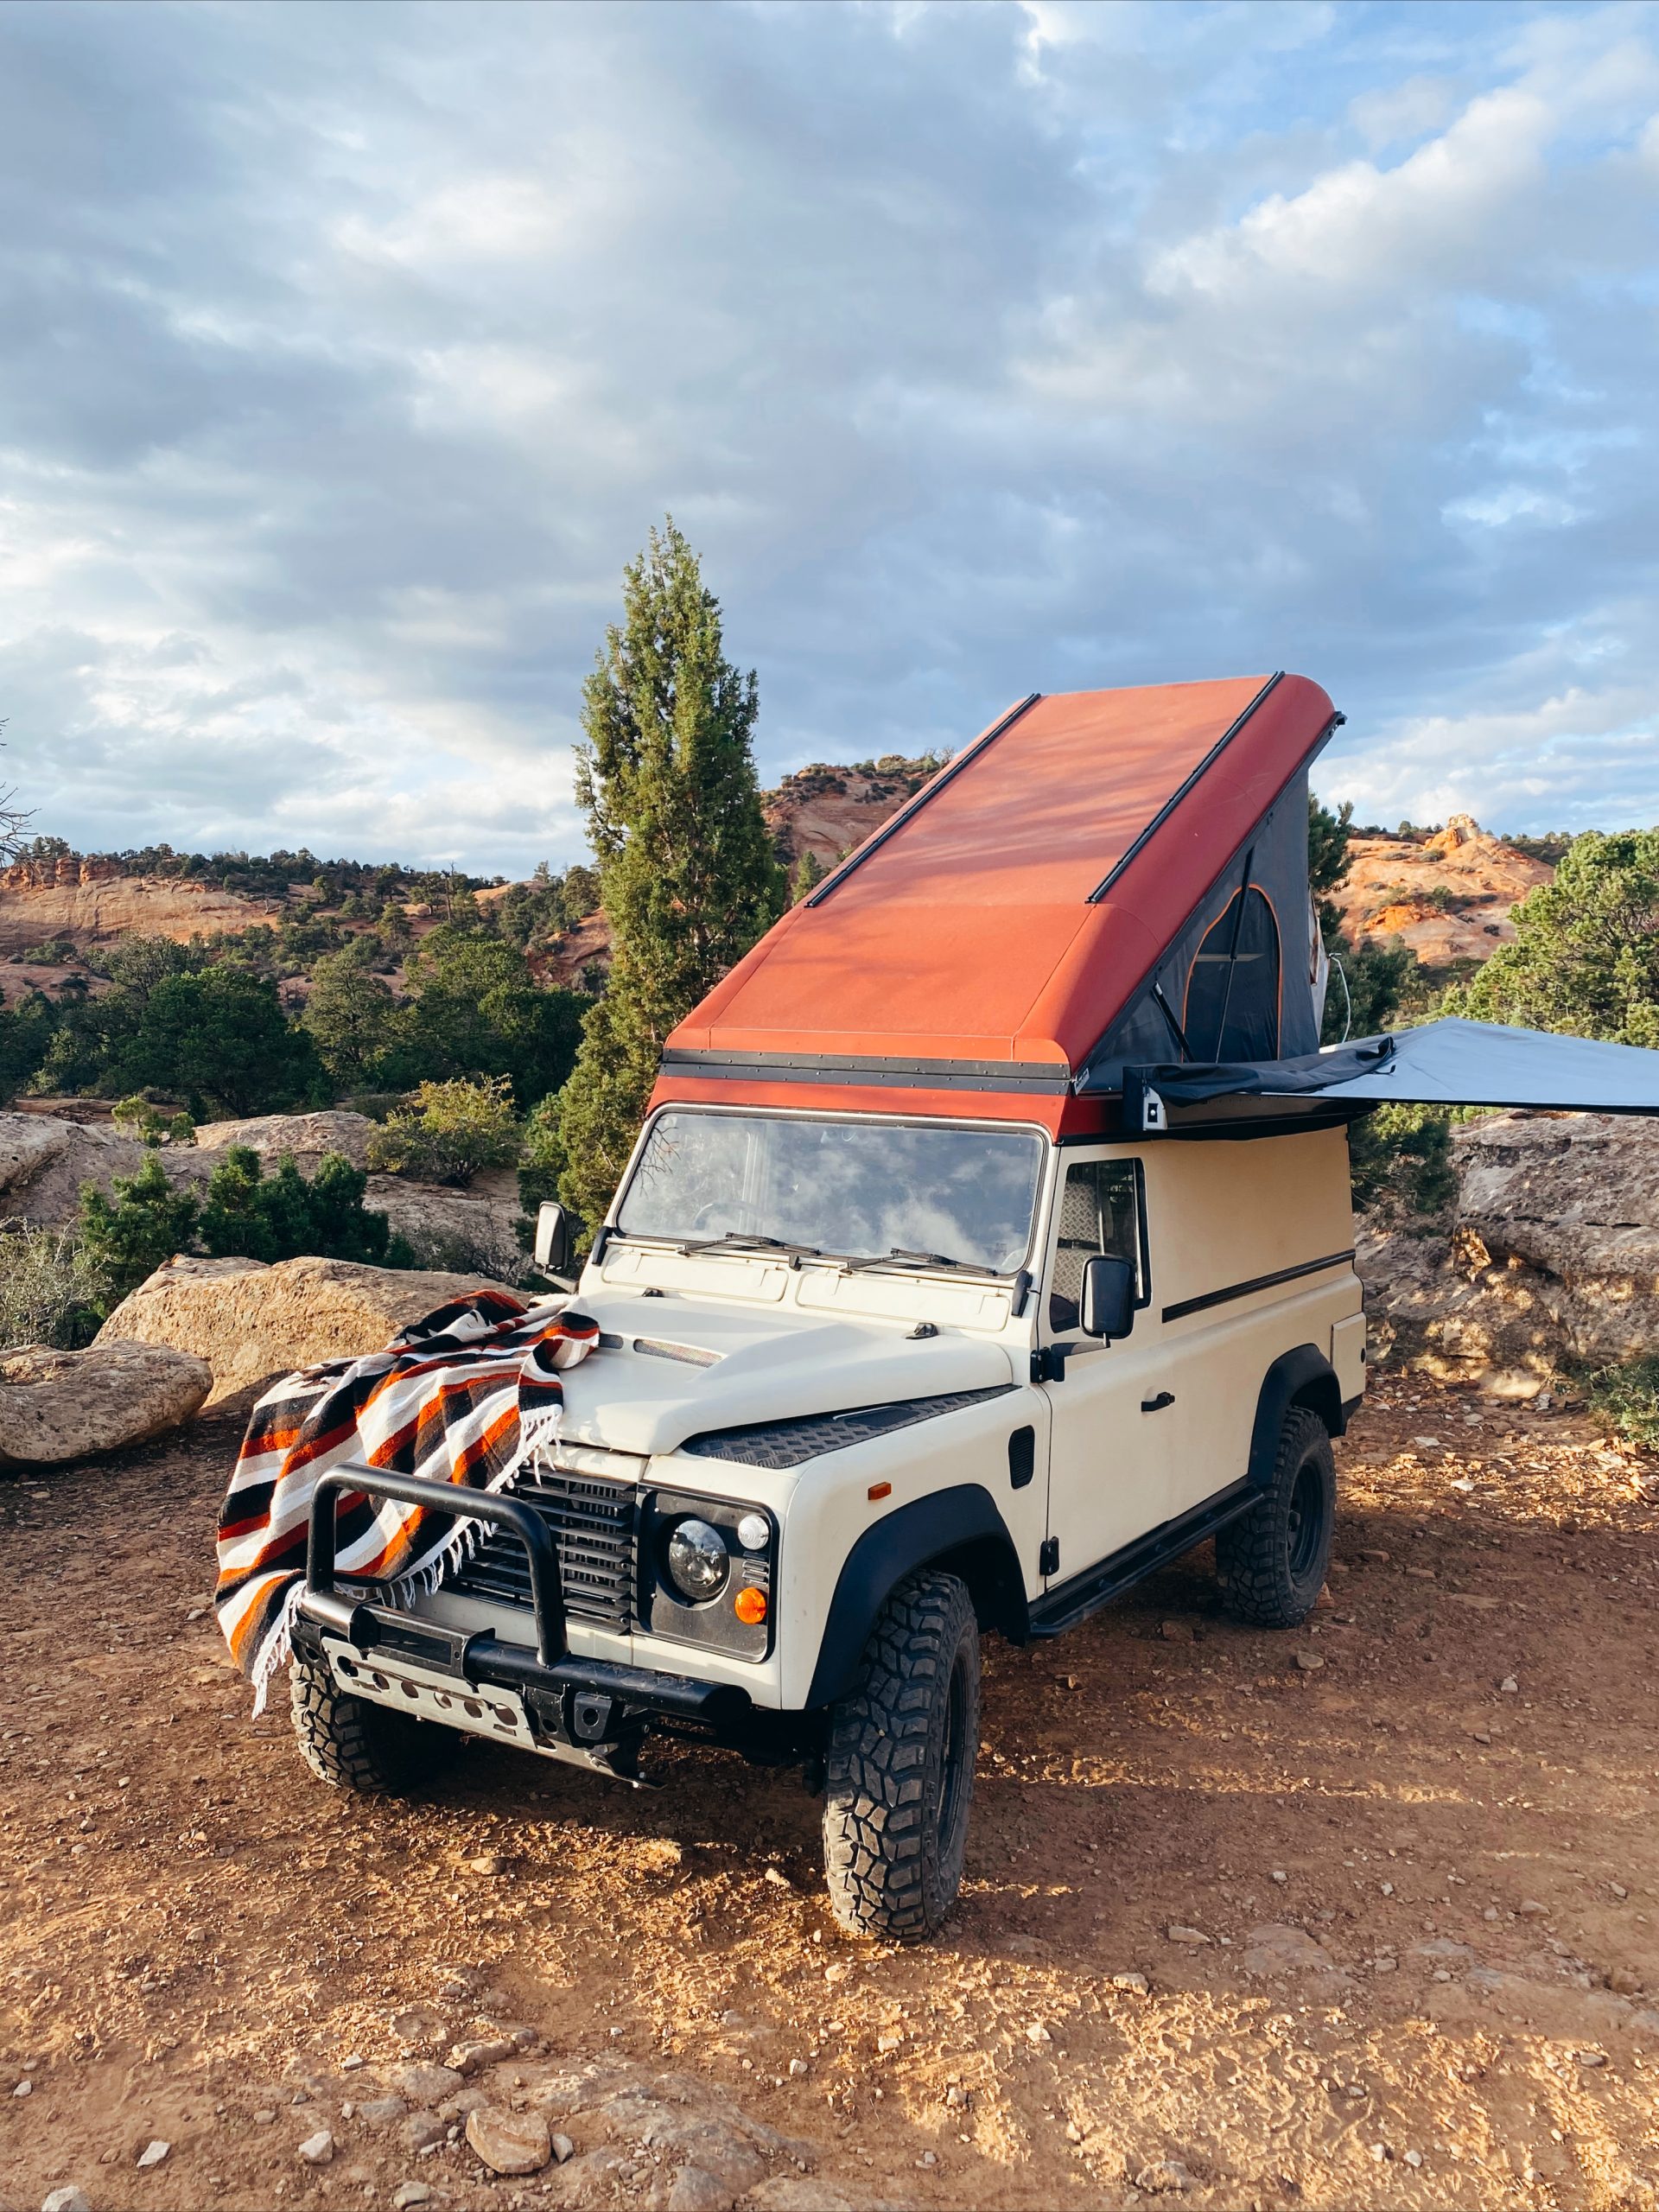 Vintage Land Rovers are often used as overland trucks